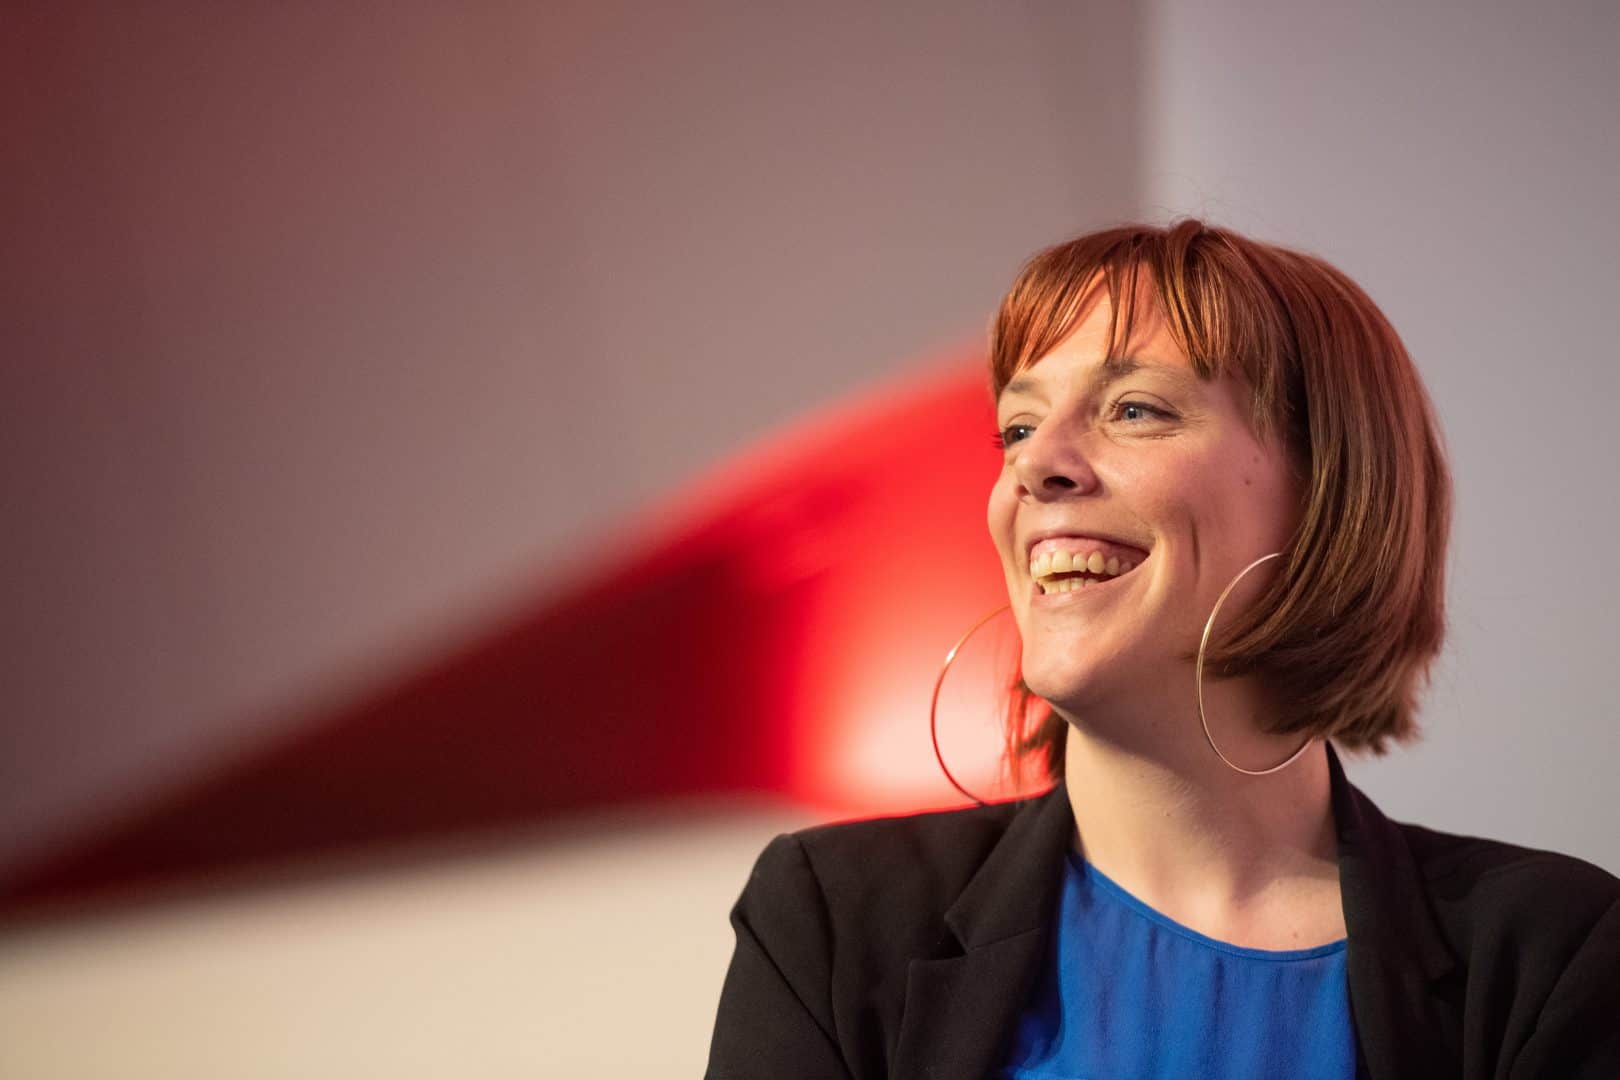 Labour’s Jess Phillips poised to enter race to succeed Jeremy Corbyn